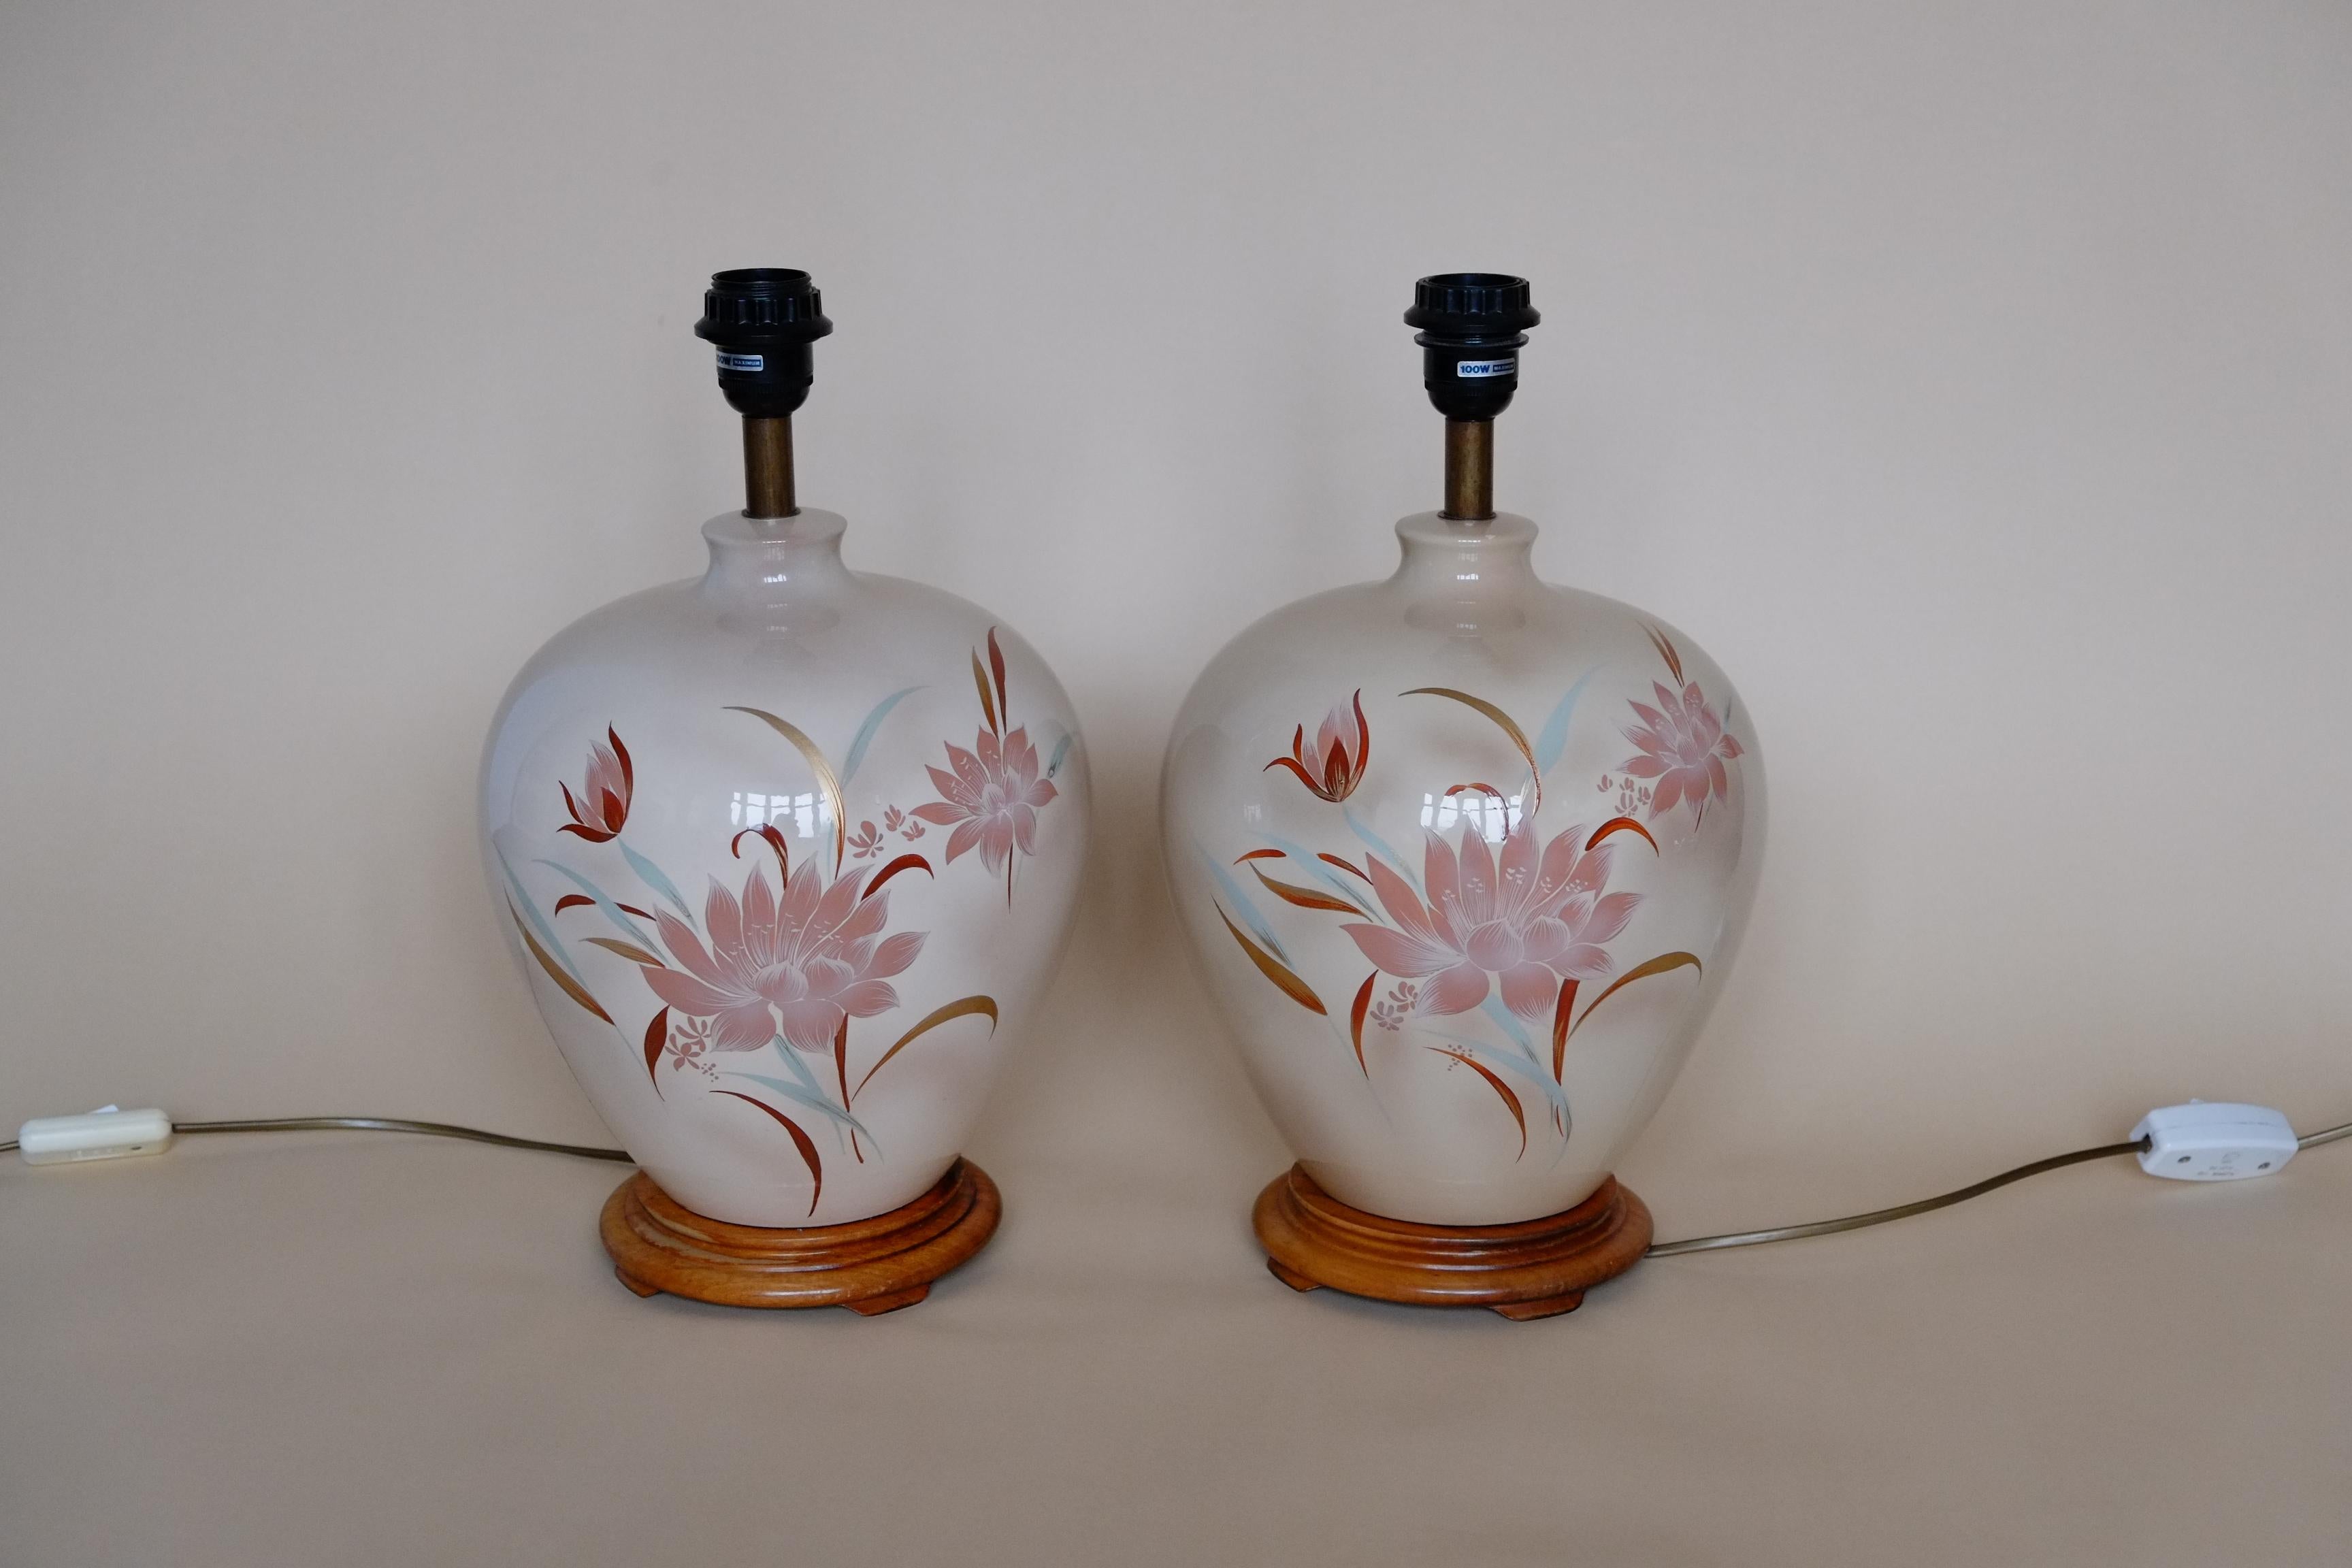 A beautiful pair of large ceramic lamps with a floral motif. The lamps have a wonderful bulbous ginger jar shape on a wood base. Finished in a glossy peachy plaster tone with muted pinks, mint green and pale gold floral decoration. The floral